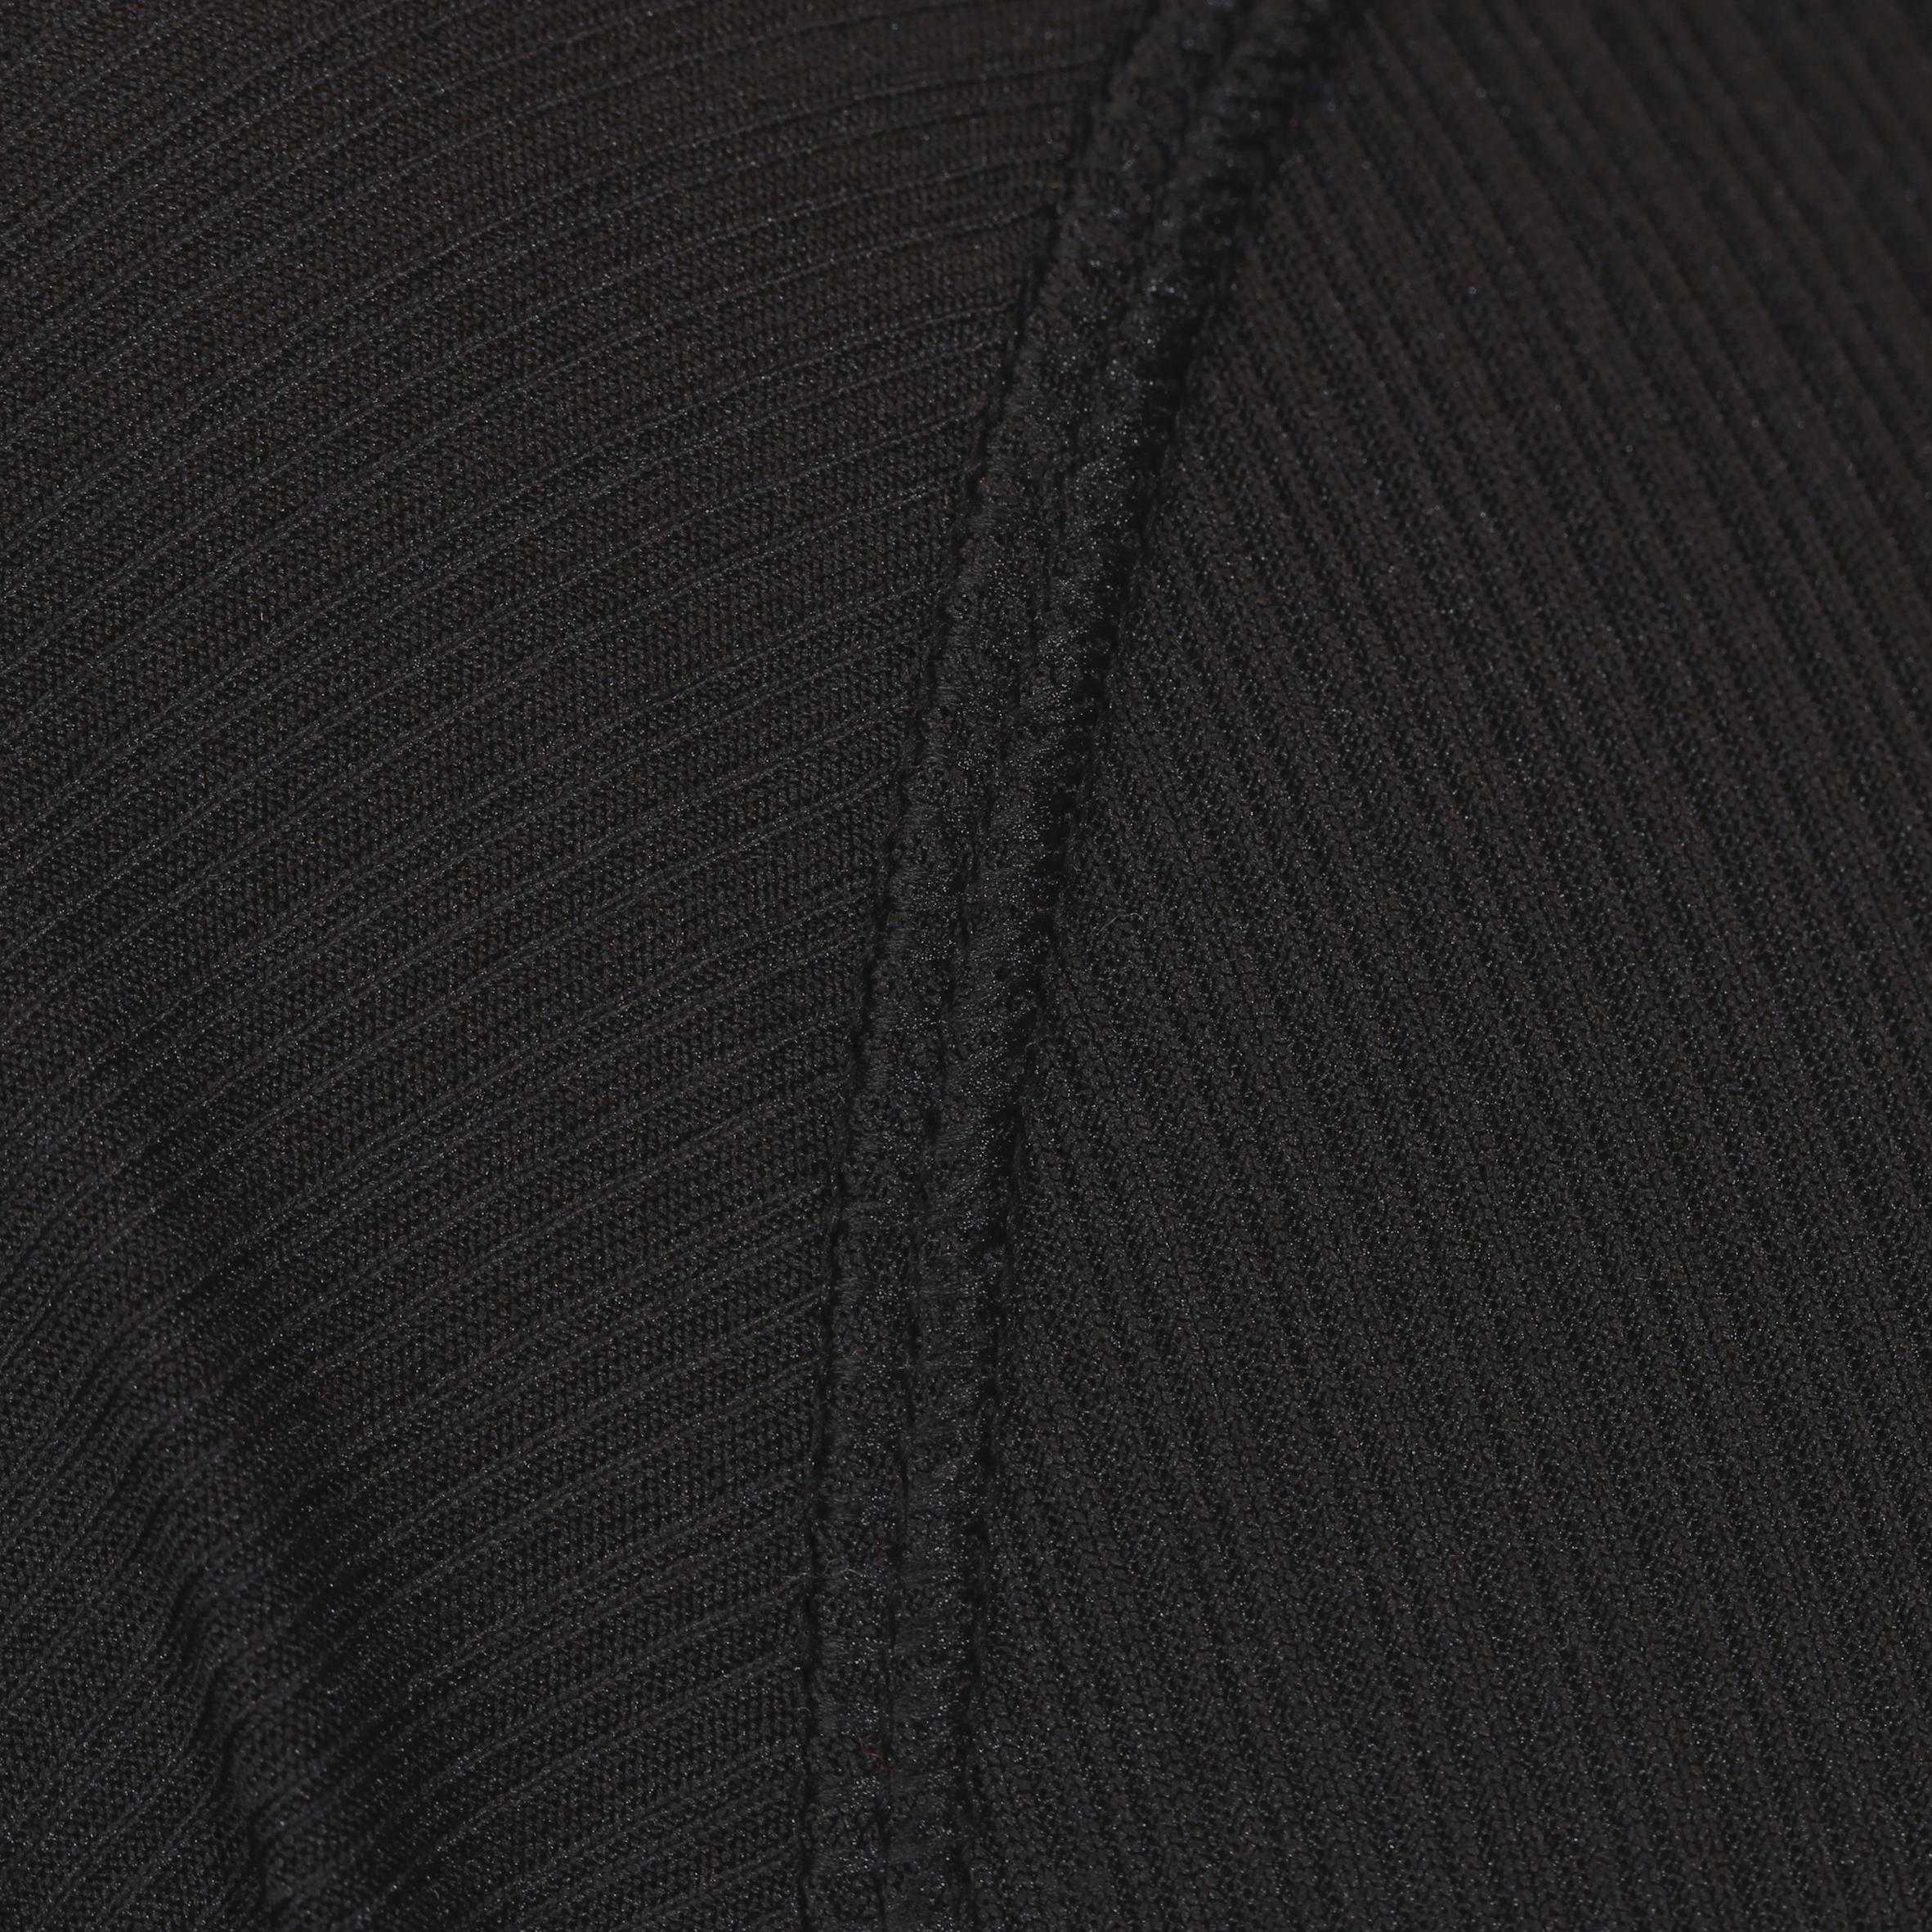 Essential Cycling Base Layer - Black 7/7